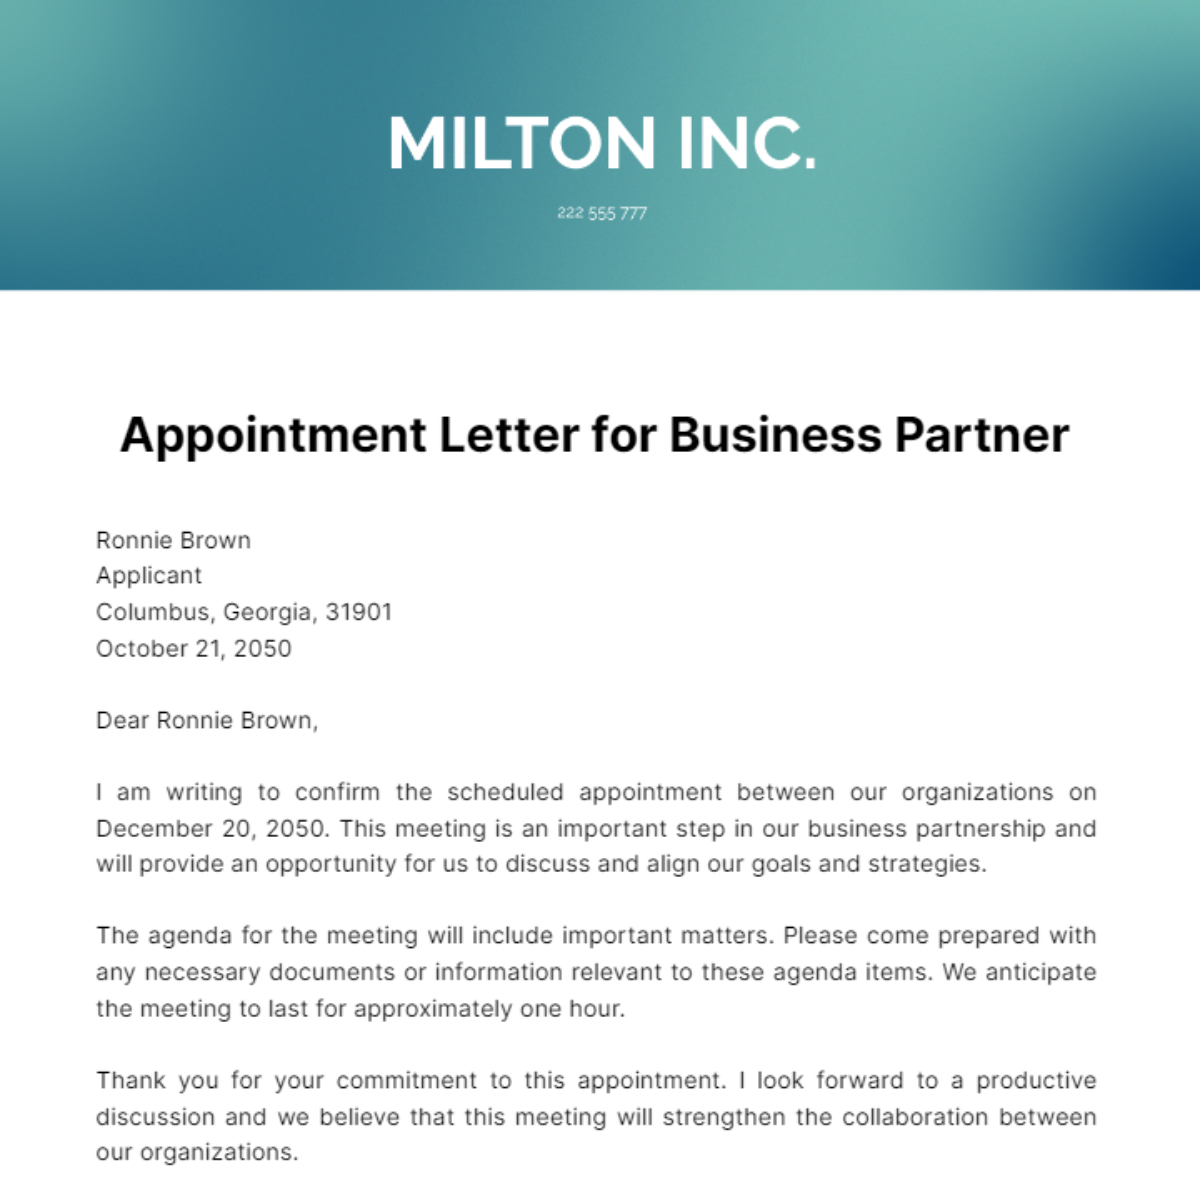 Appointment Letter for Business Partner Template